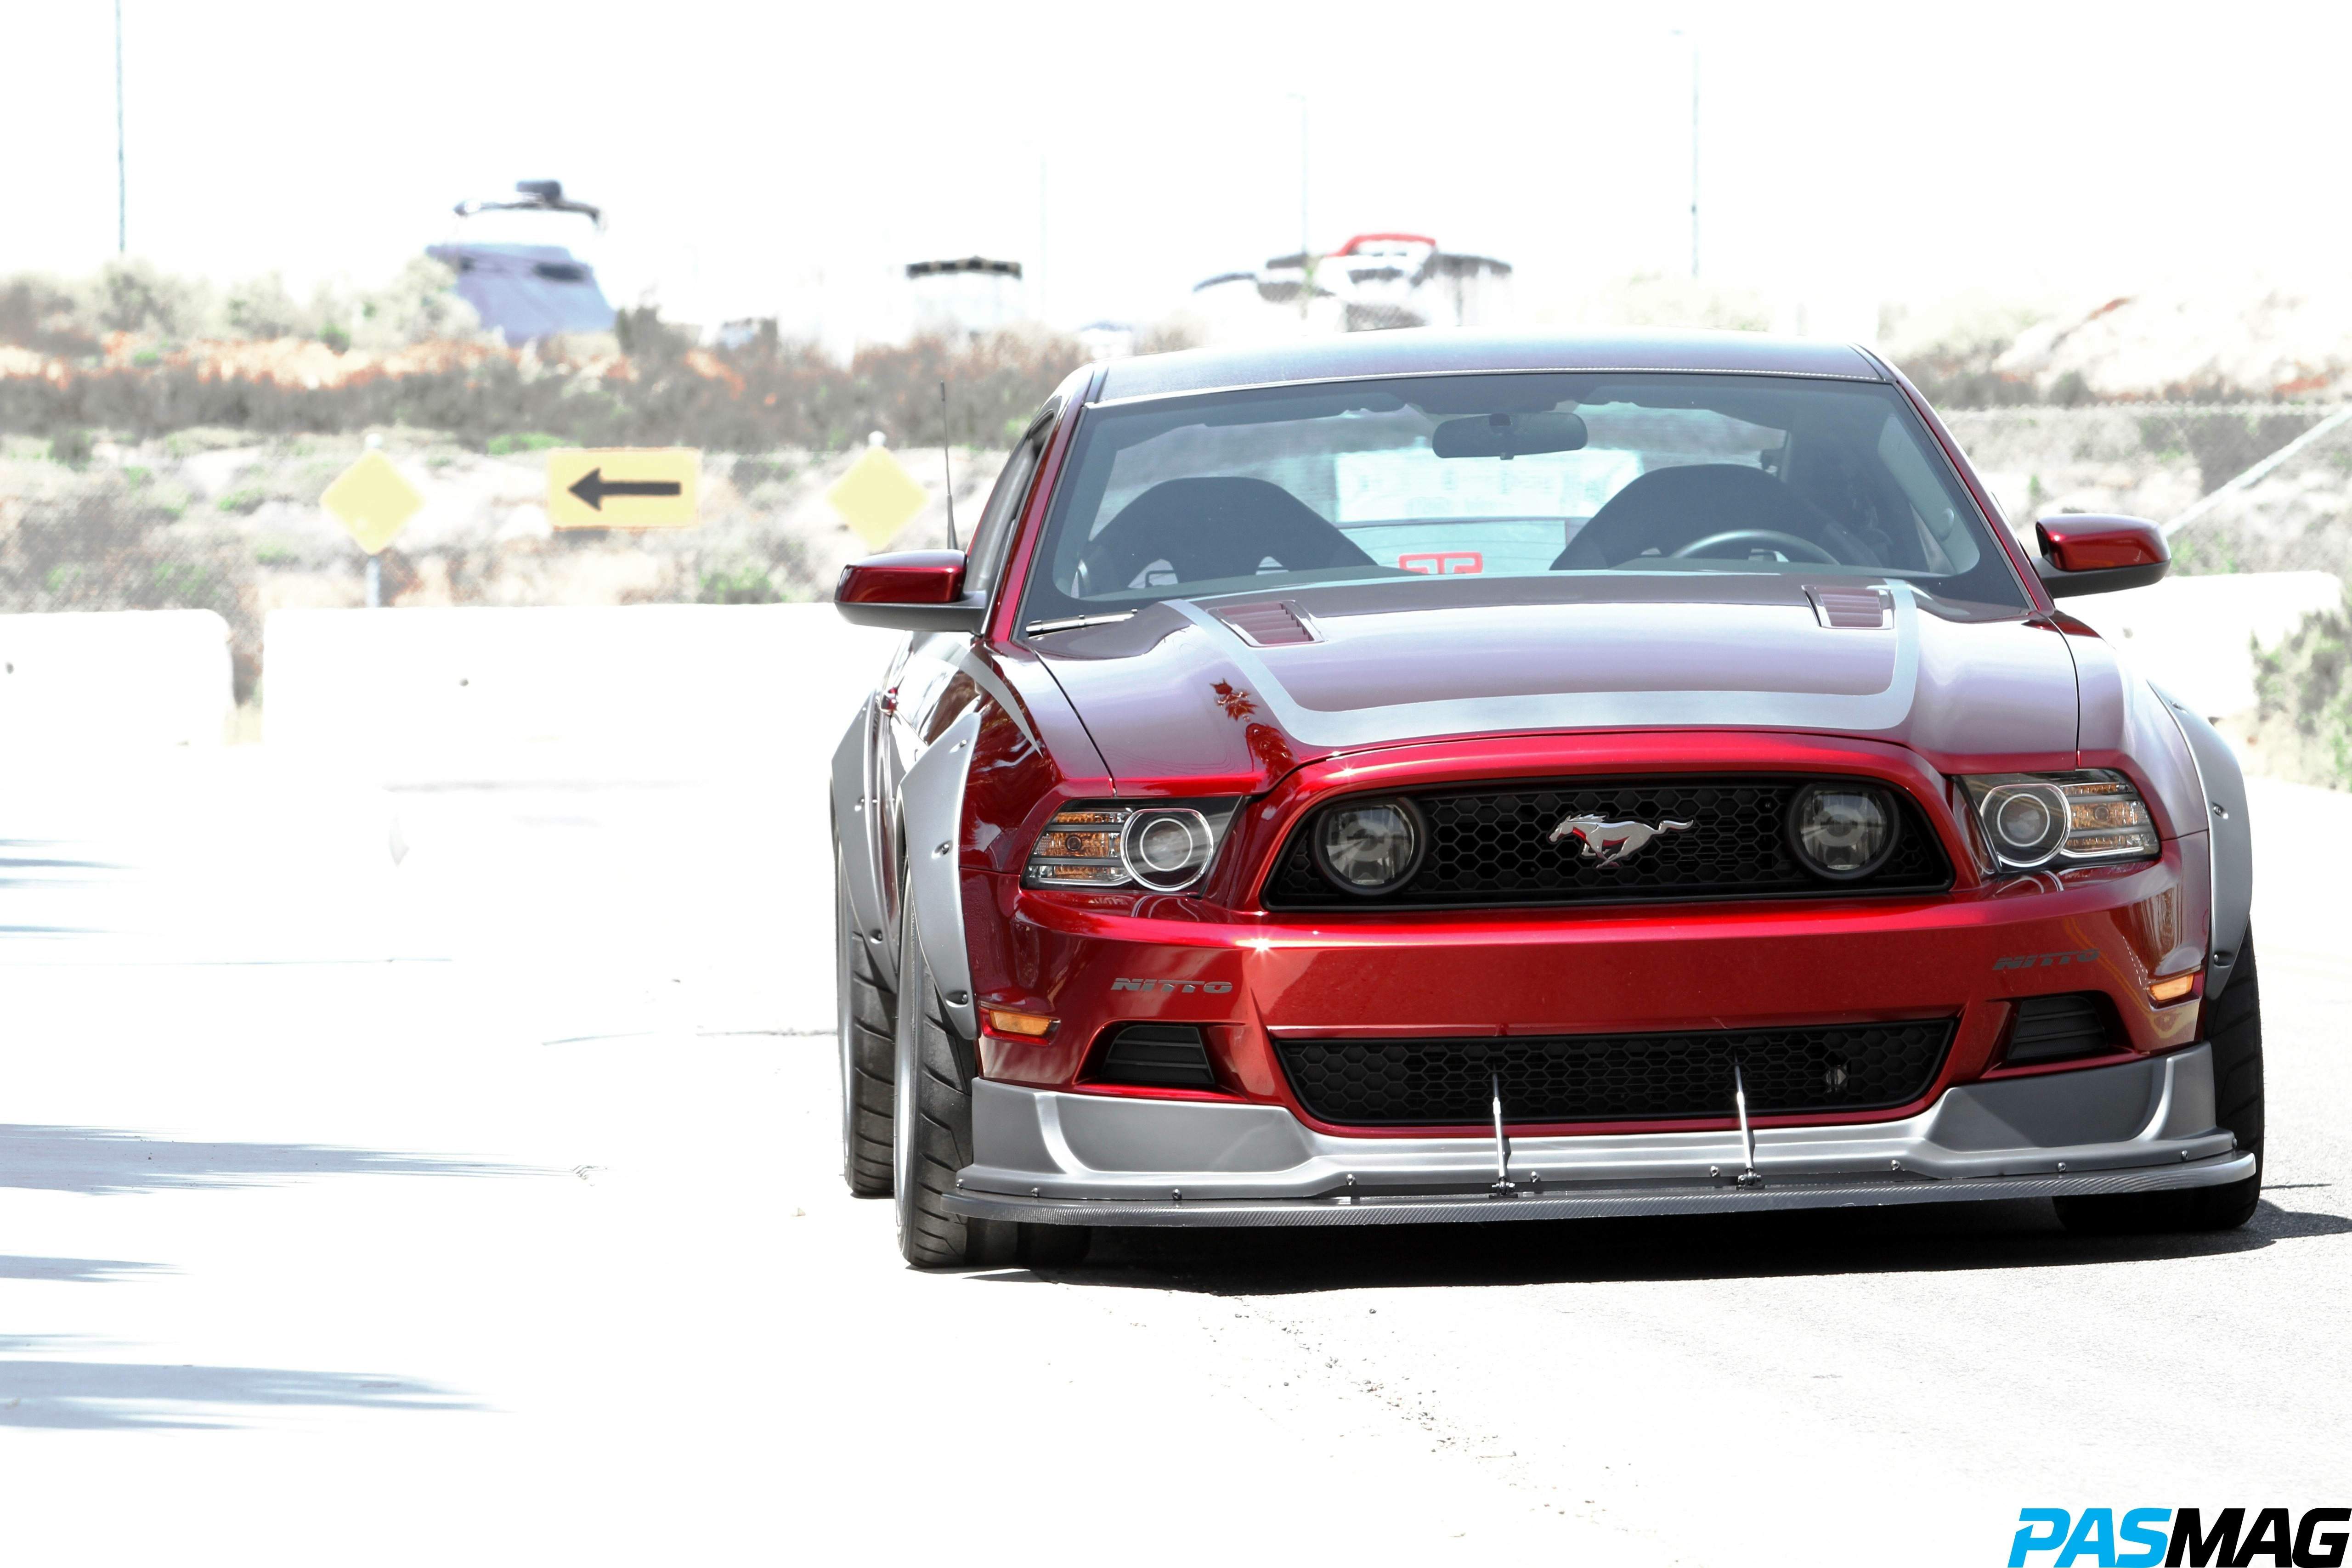 Mother of All Mustangs: Jim Holloway's 2013 Ford Mustang Mothers RTR